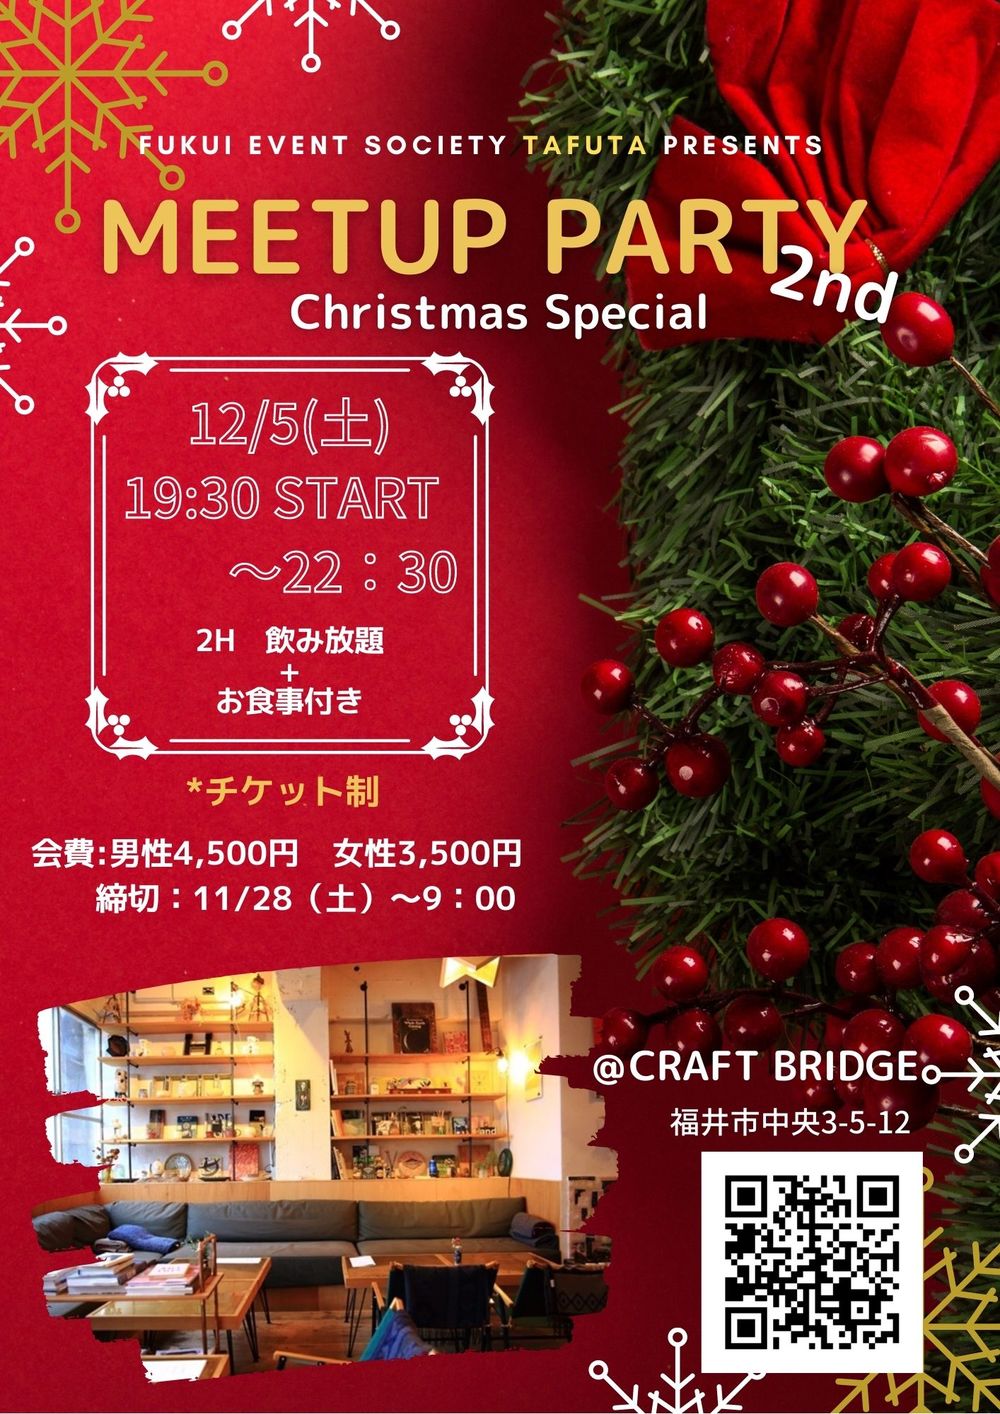 MEETUP　PARTY Christmas　Special